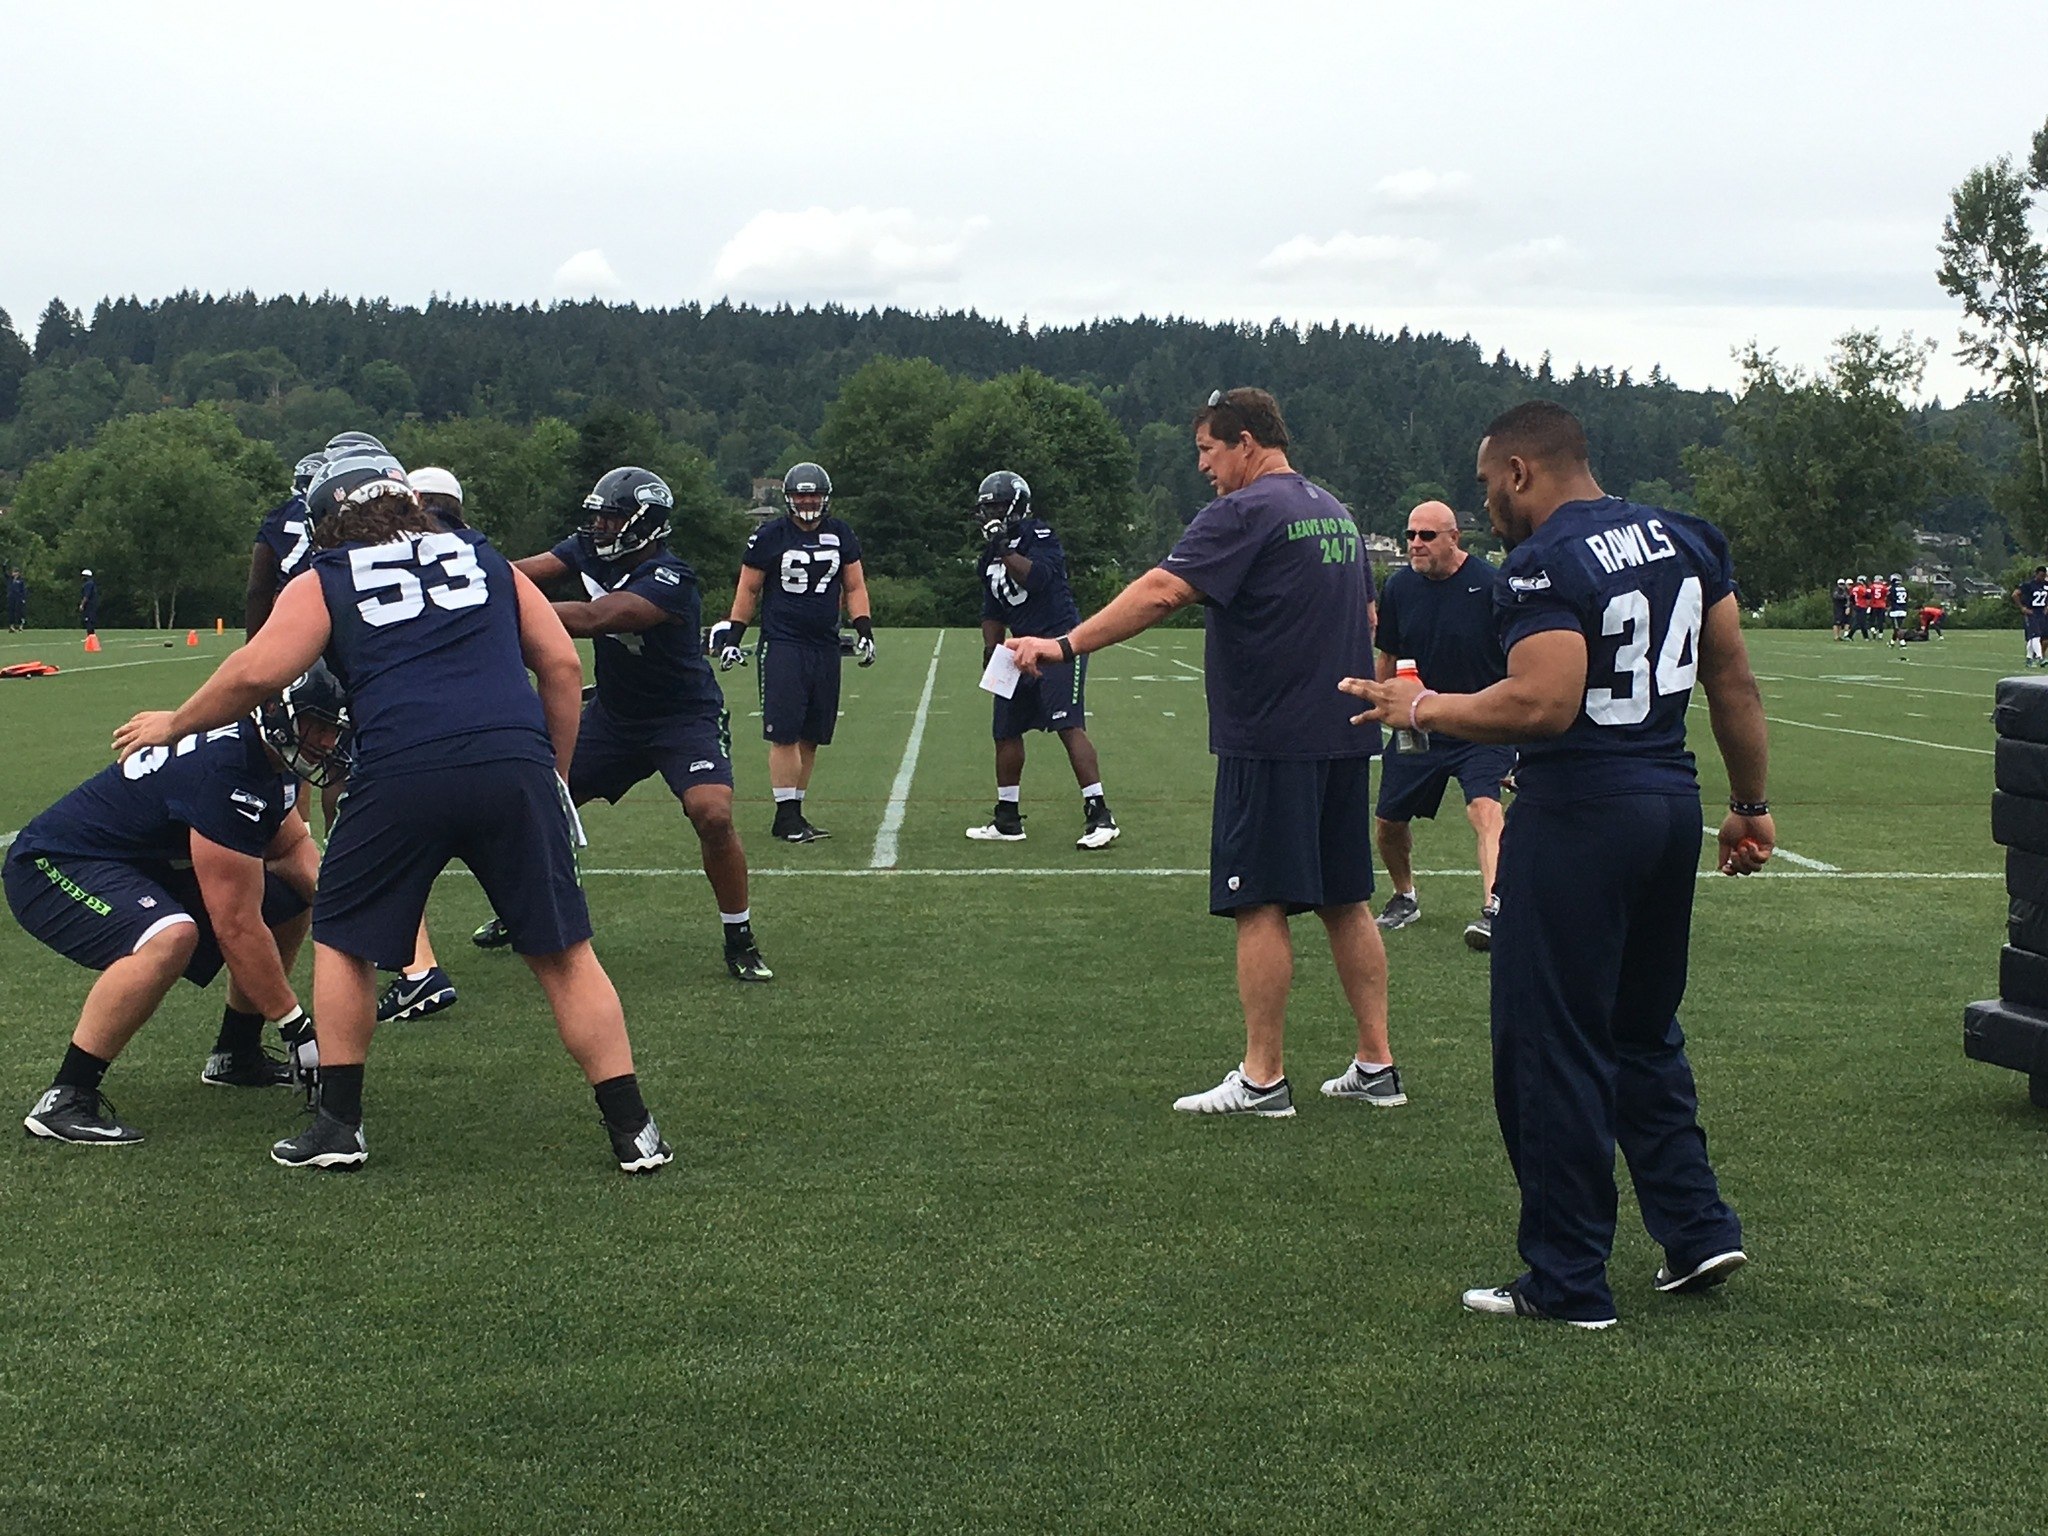 Running back Thomas Rawls (34), who is still recovering from an ankle injury, observes as the Seahawks put the offensive line through the paces at Thursday’s OTA.